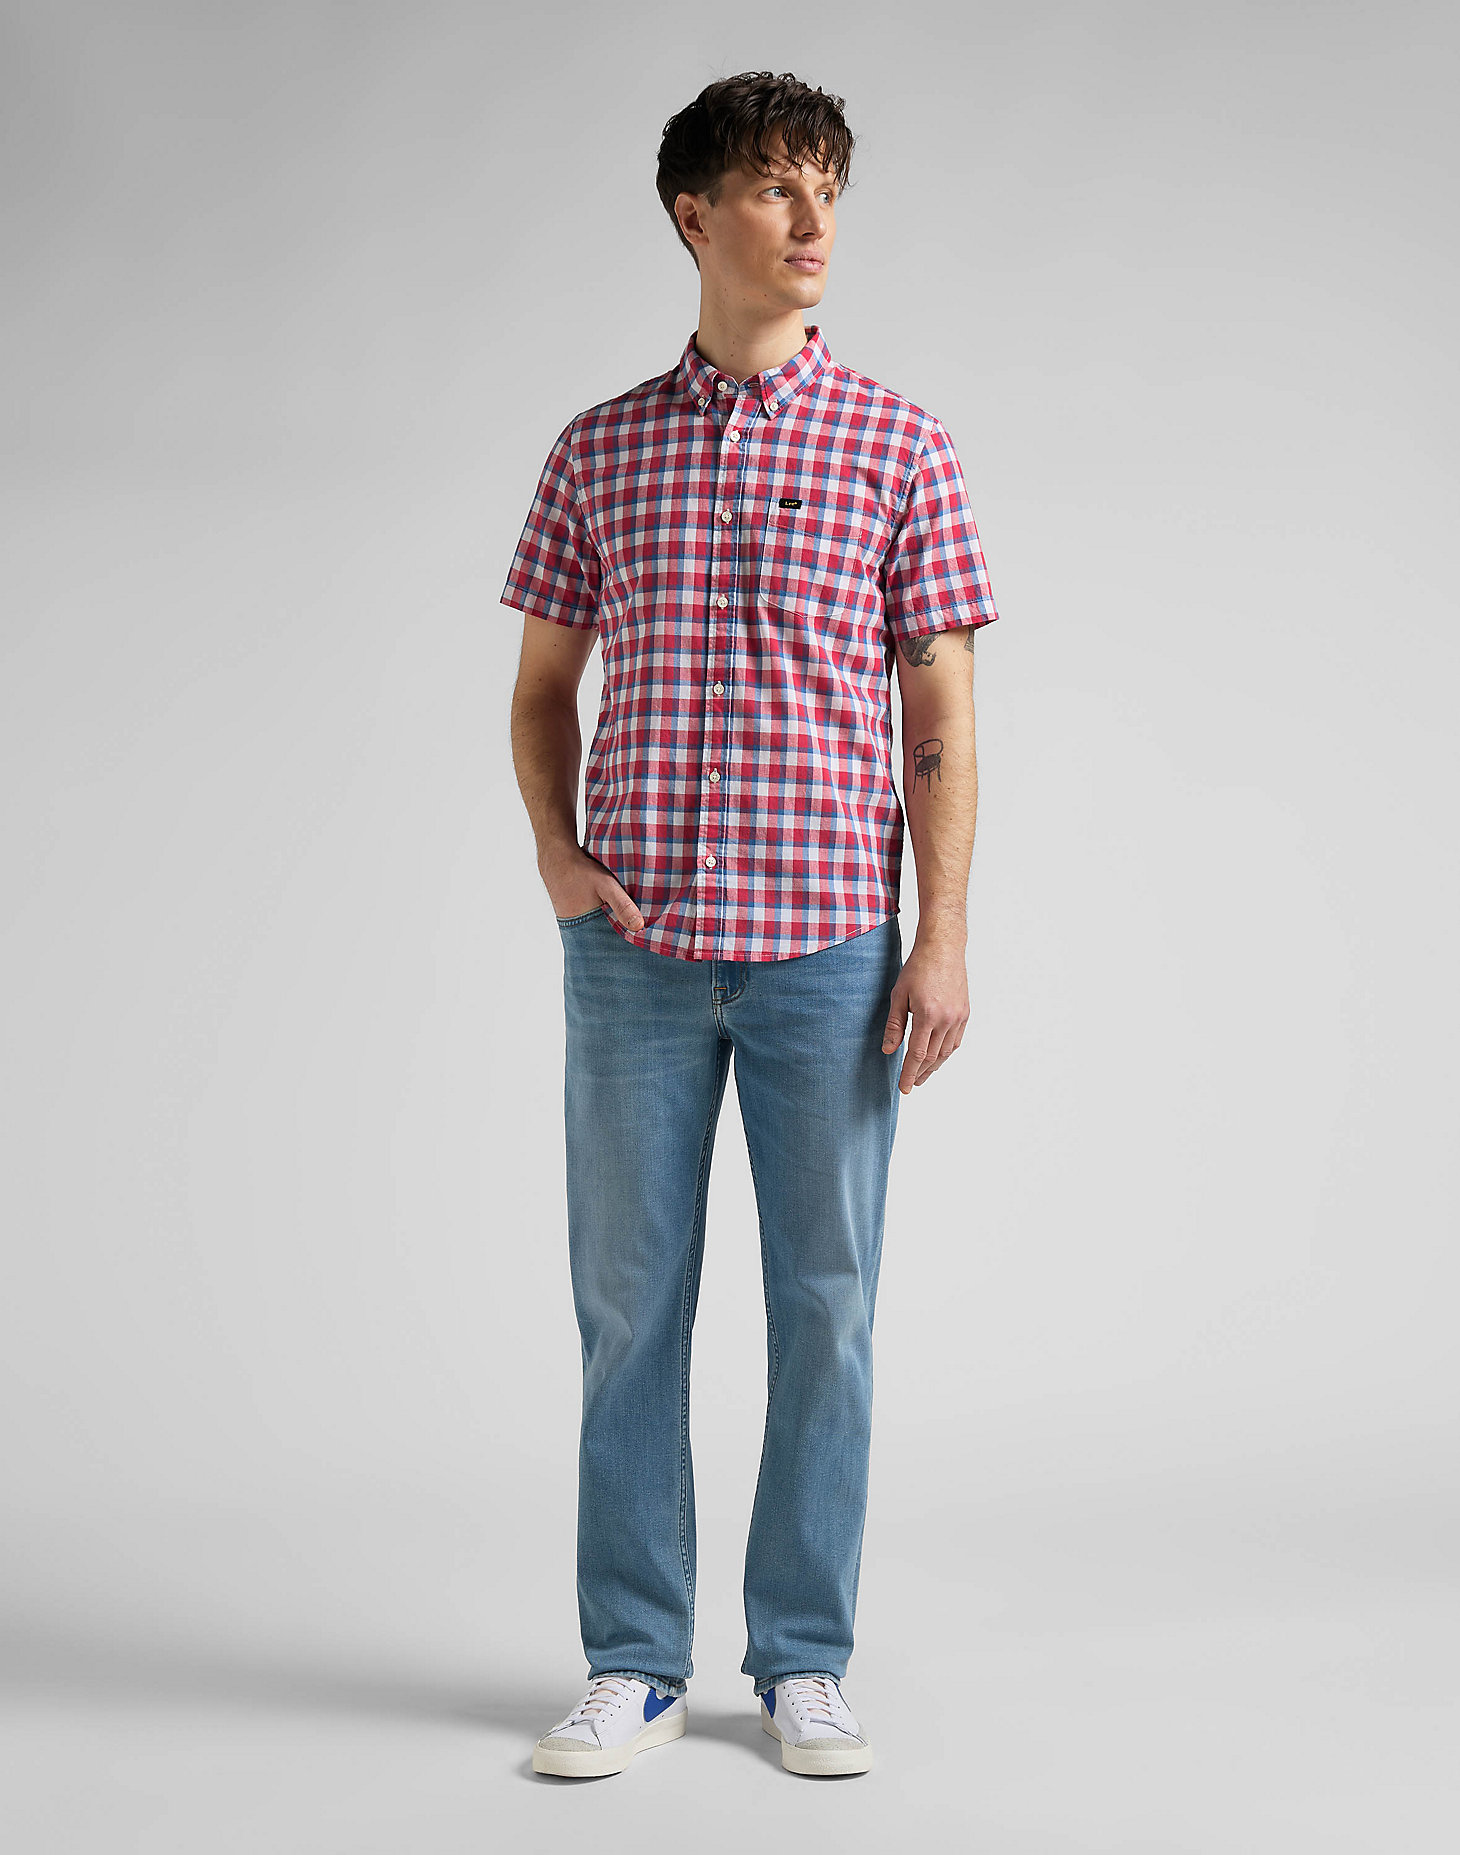 Short Sleeve Button Down Shirt in Real Red alternative view 2